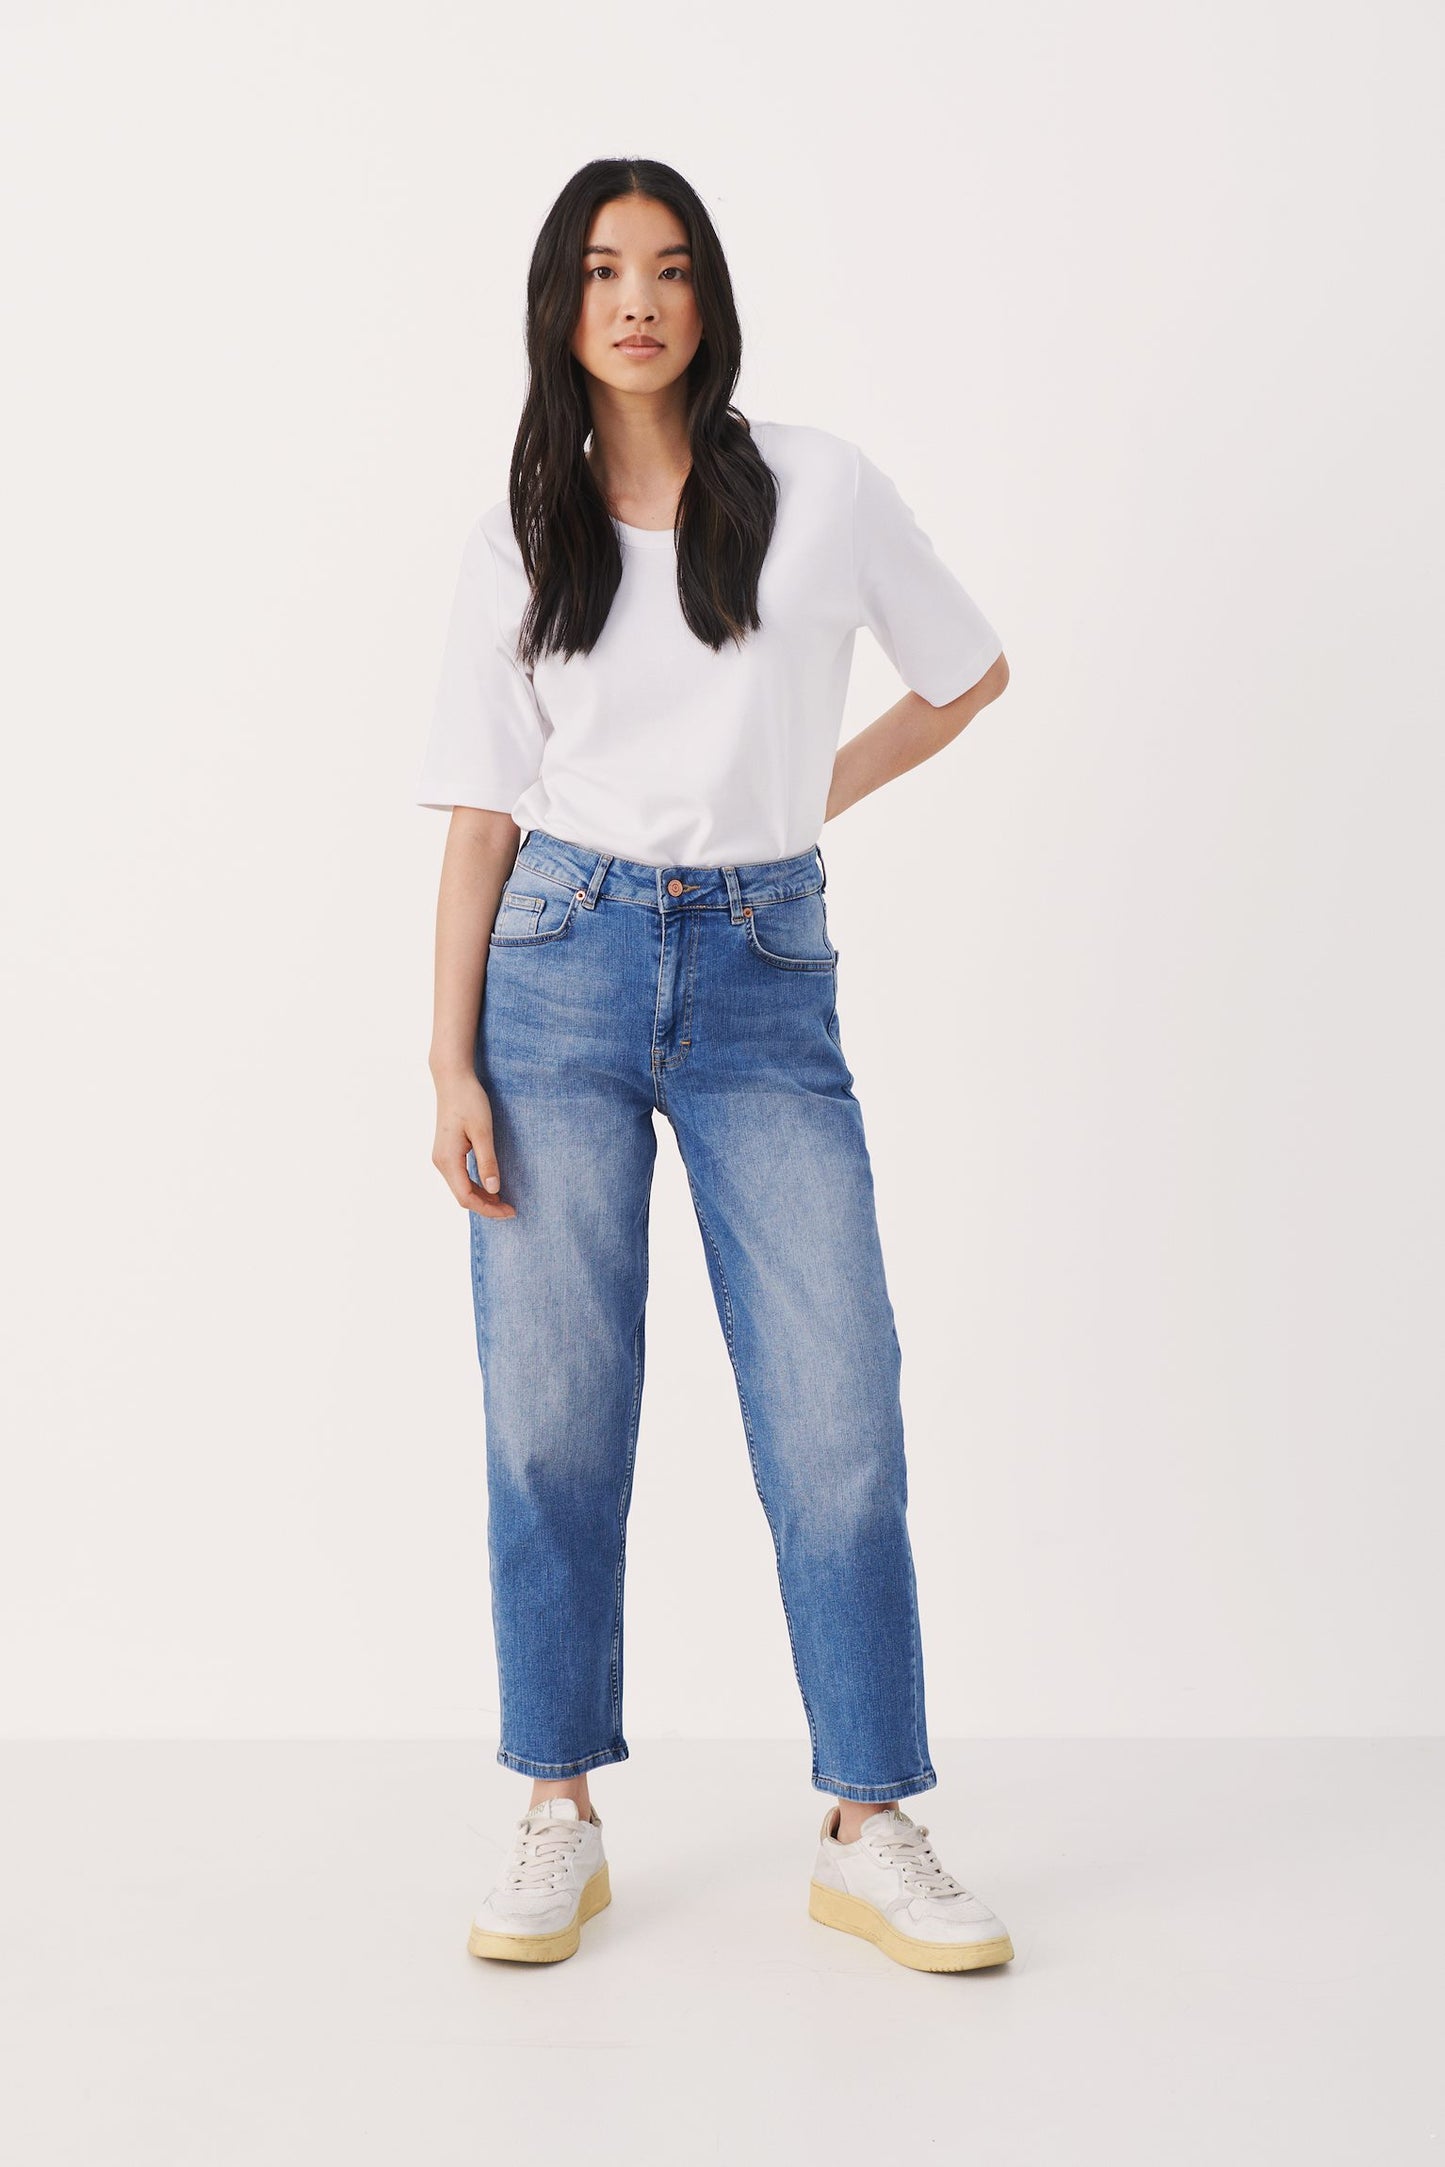 Relaxed fit Hela jeans - Part Two